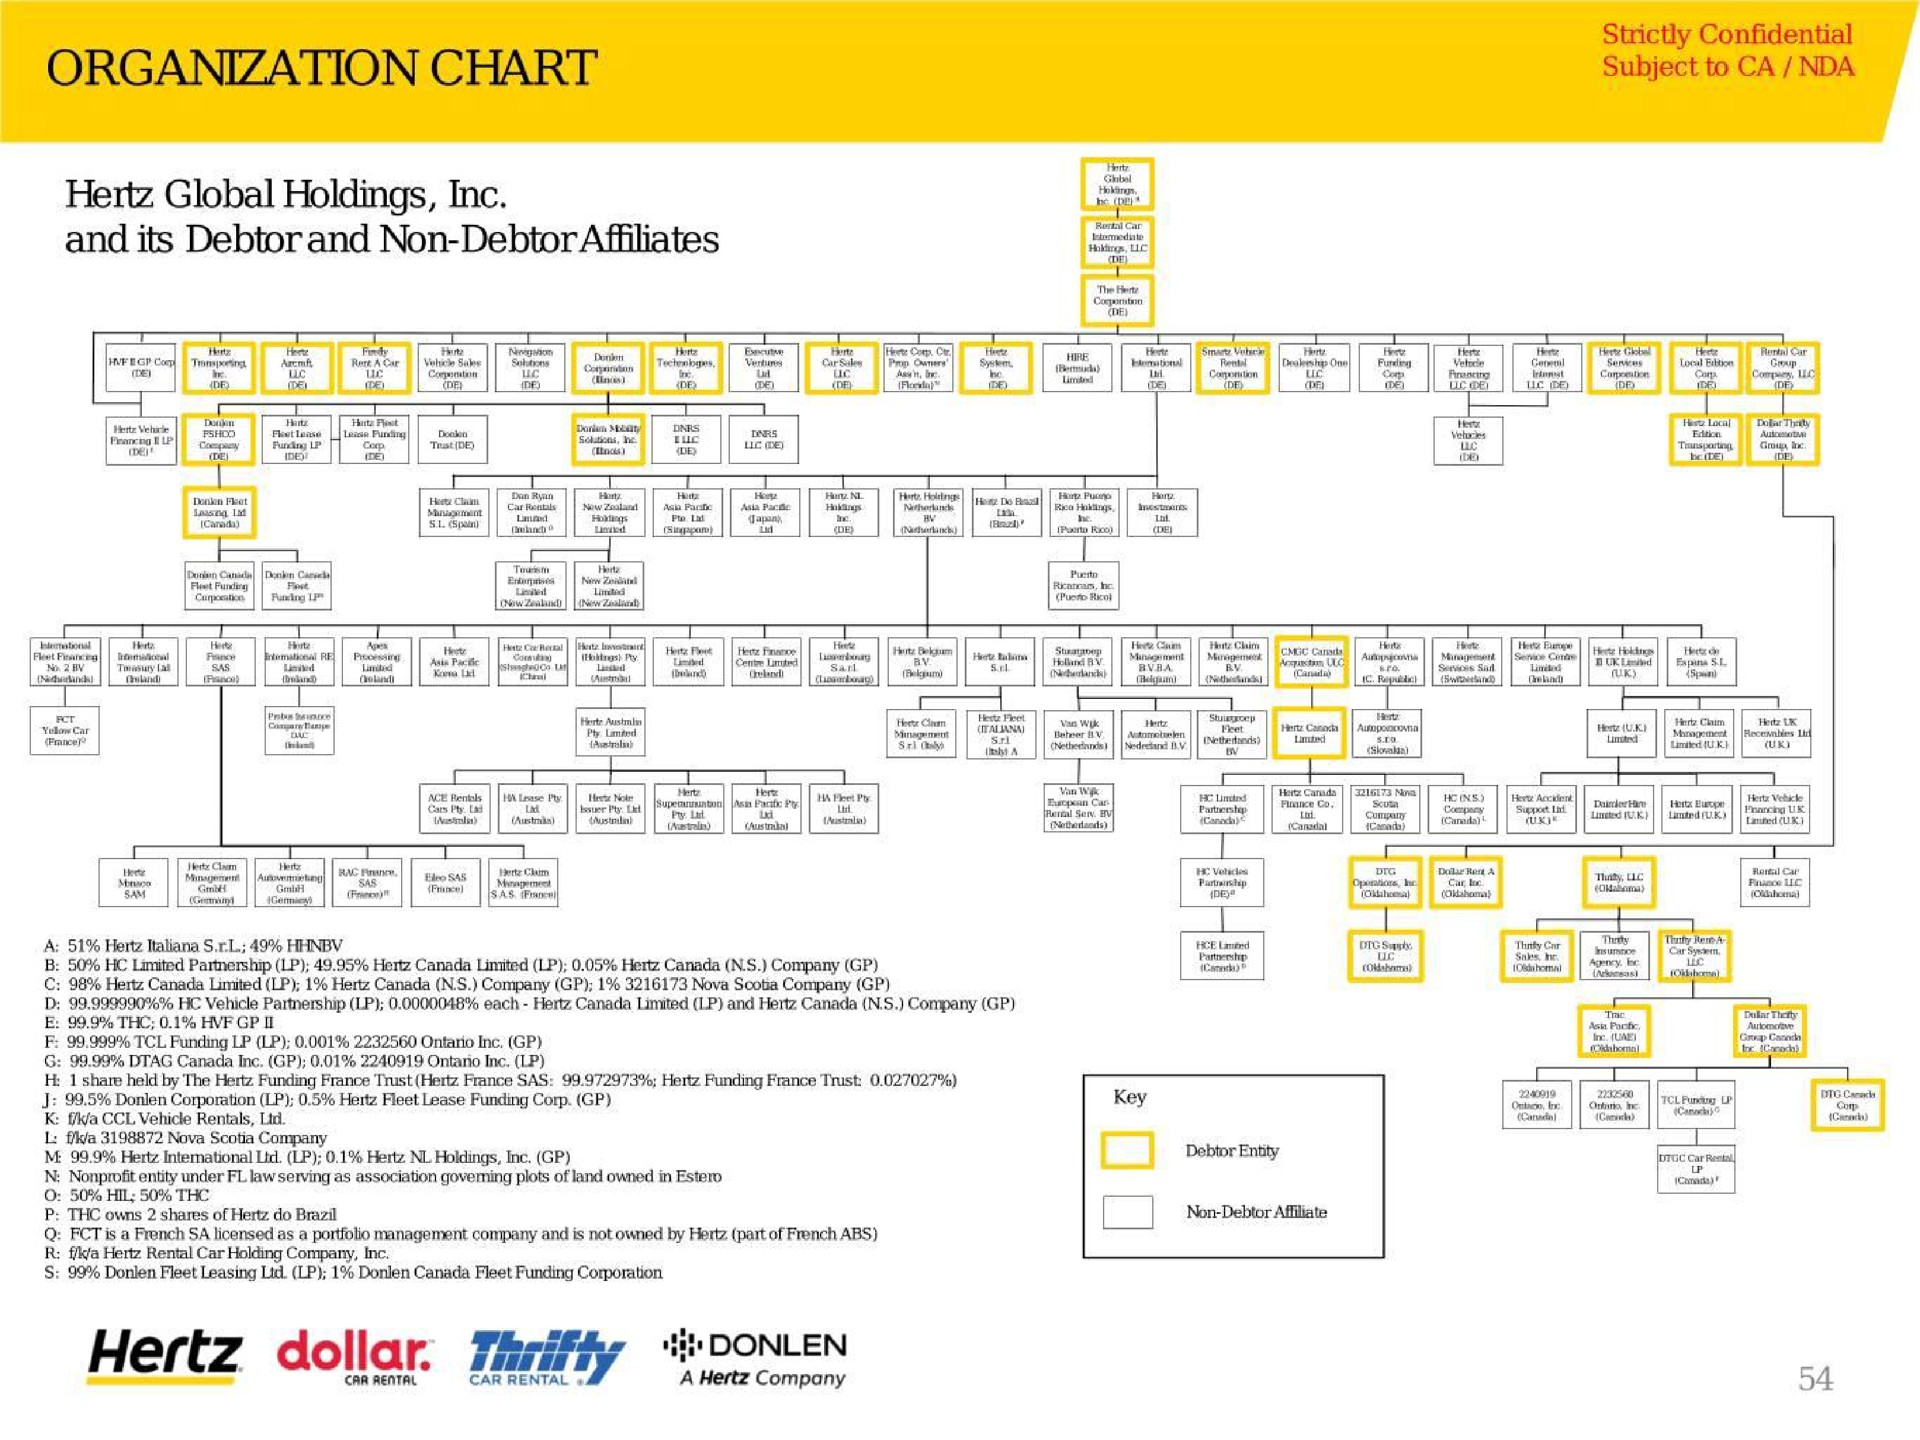 organization chart strictly confidential subject to | Hertz